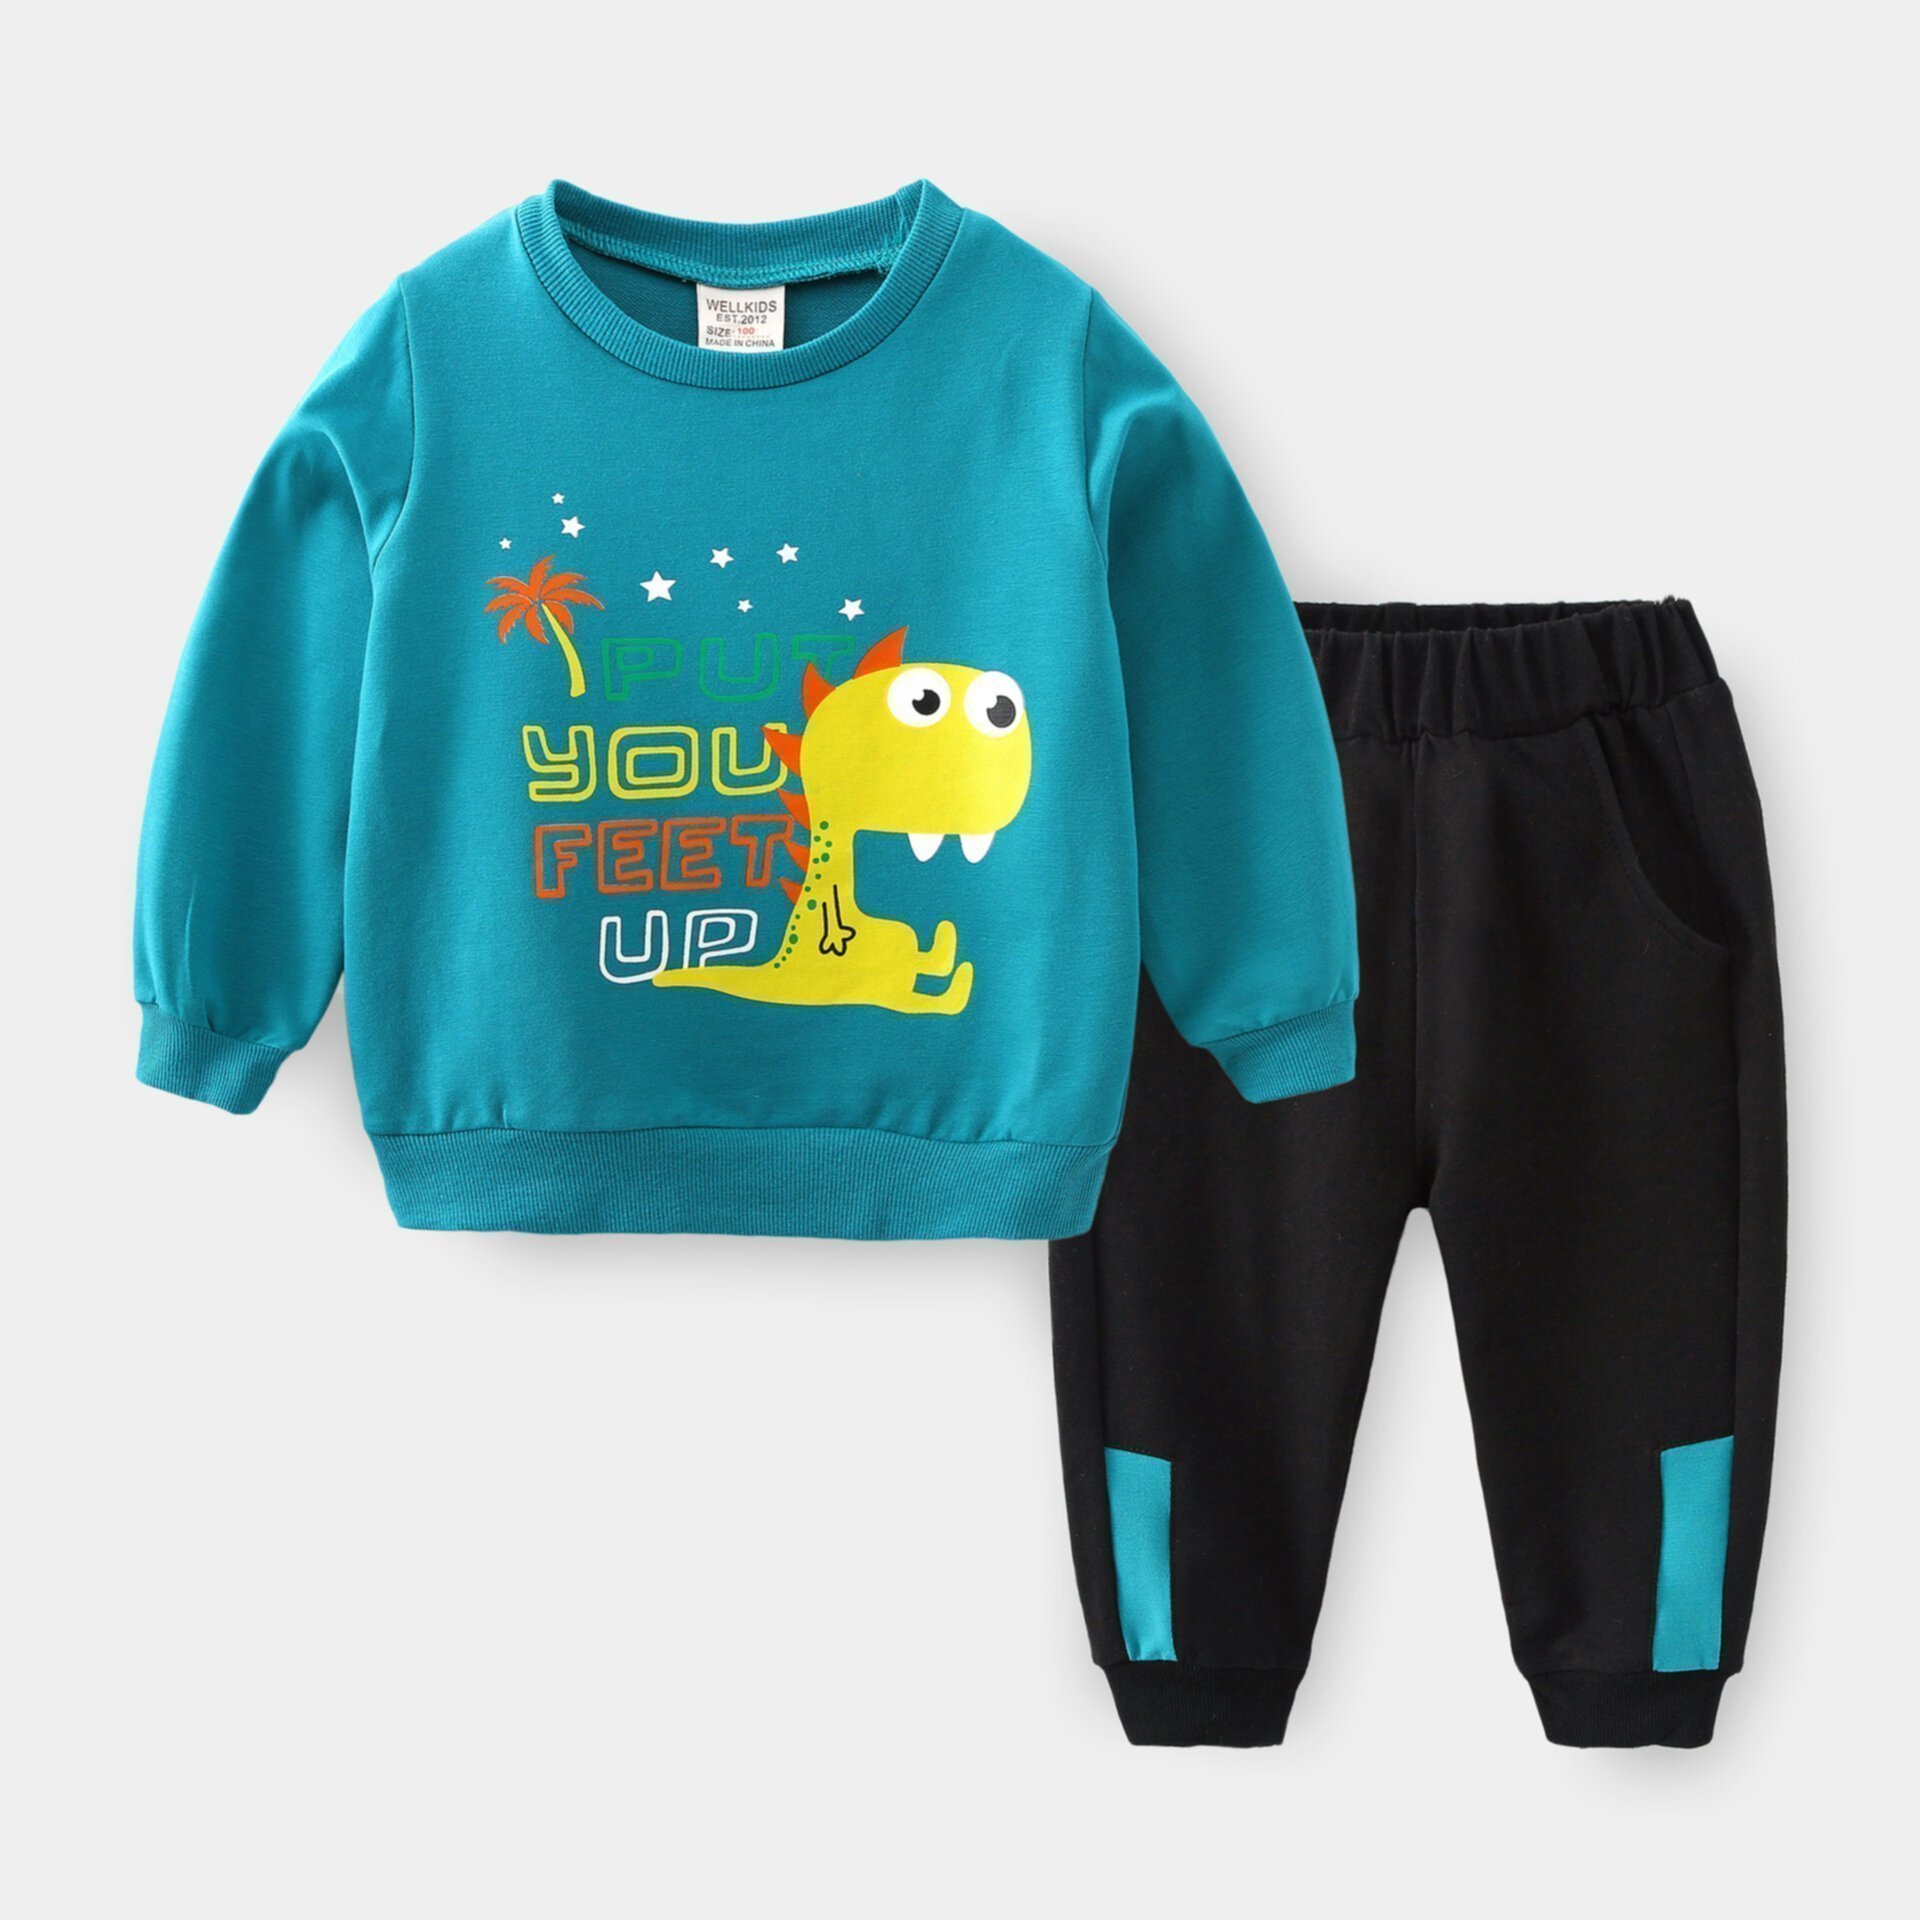 Letter printed children's sports sweatershirt suit